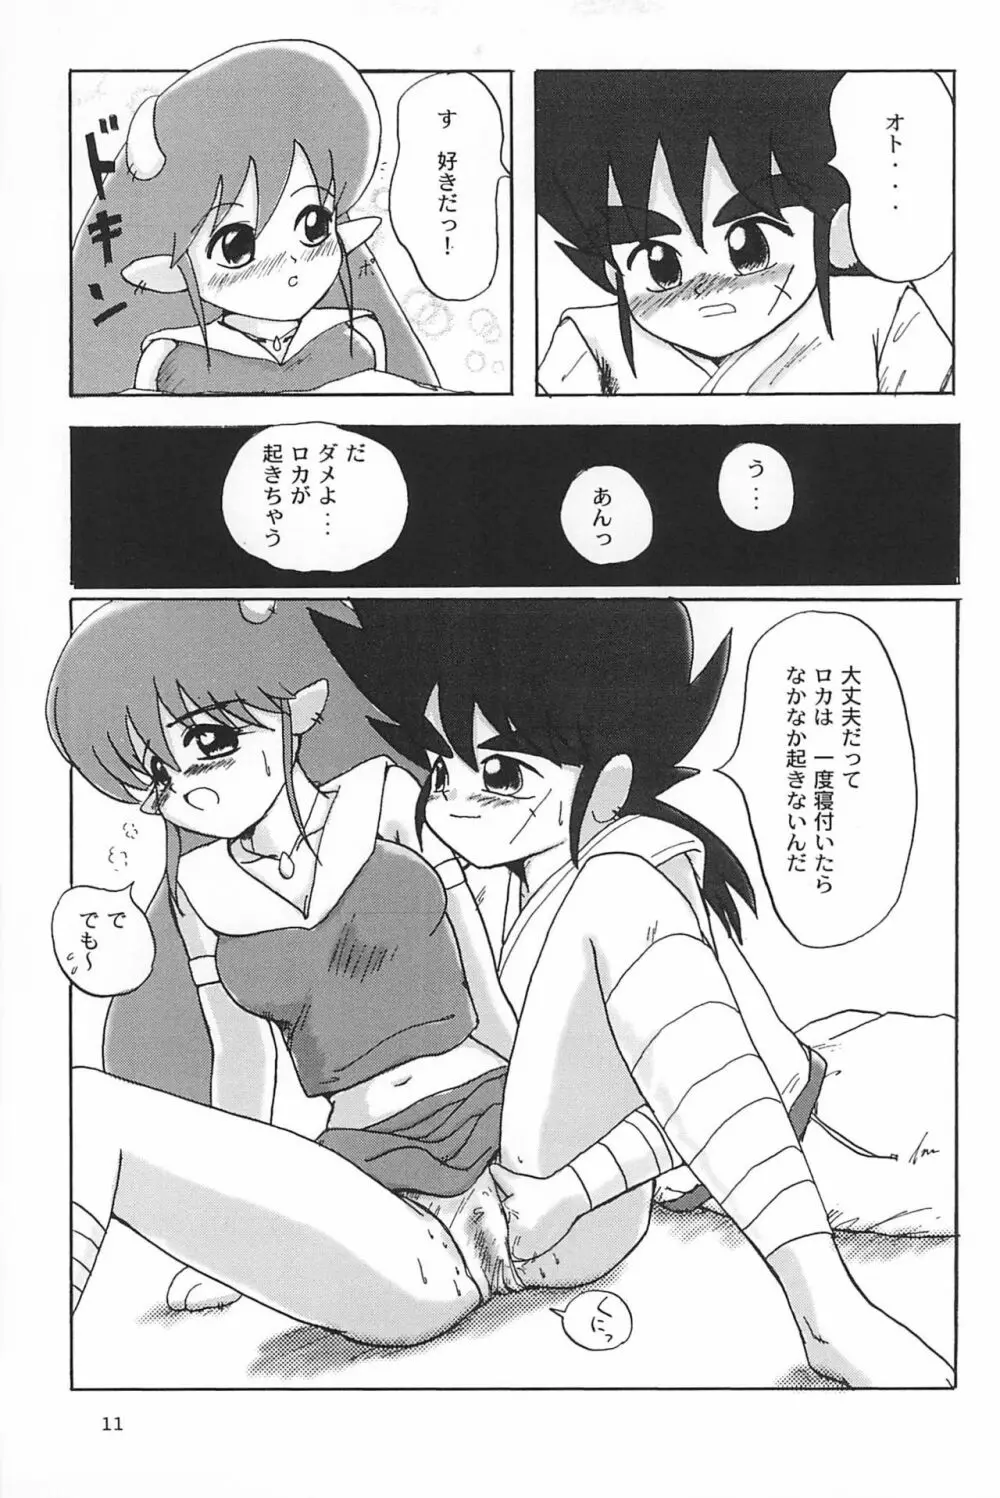 ND-special Volume 1 Page.11